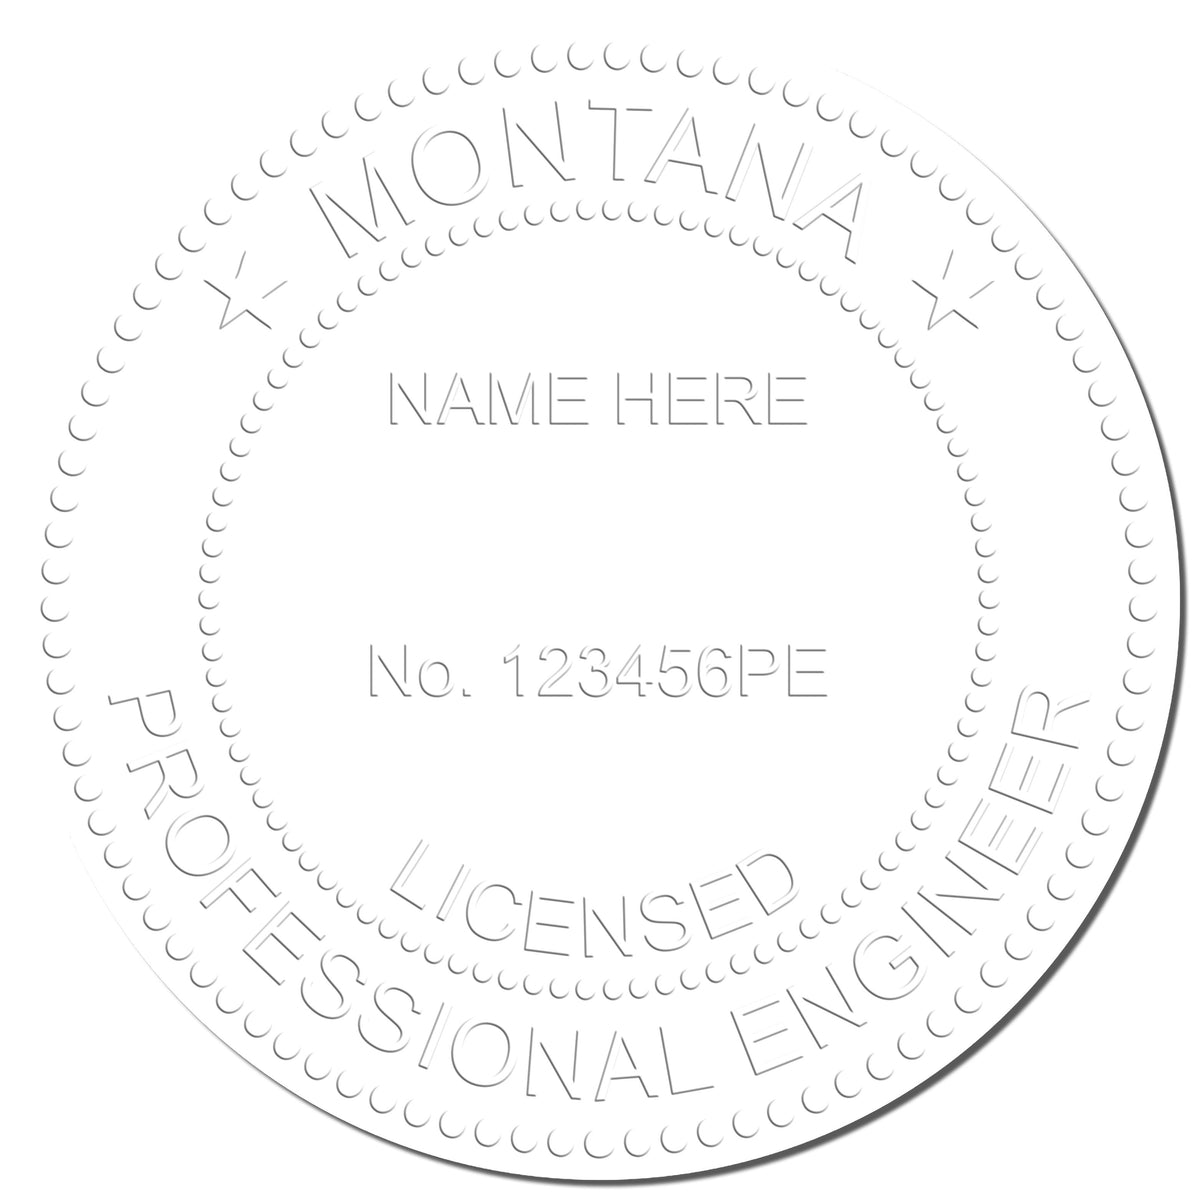 Another Example of a stamped impression of the Montana Engineer Desk Seal on a piece of office paper.